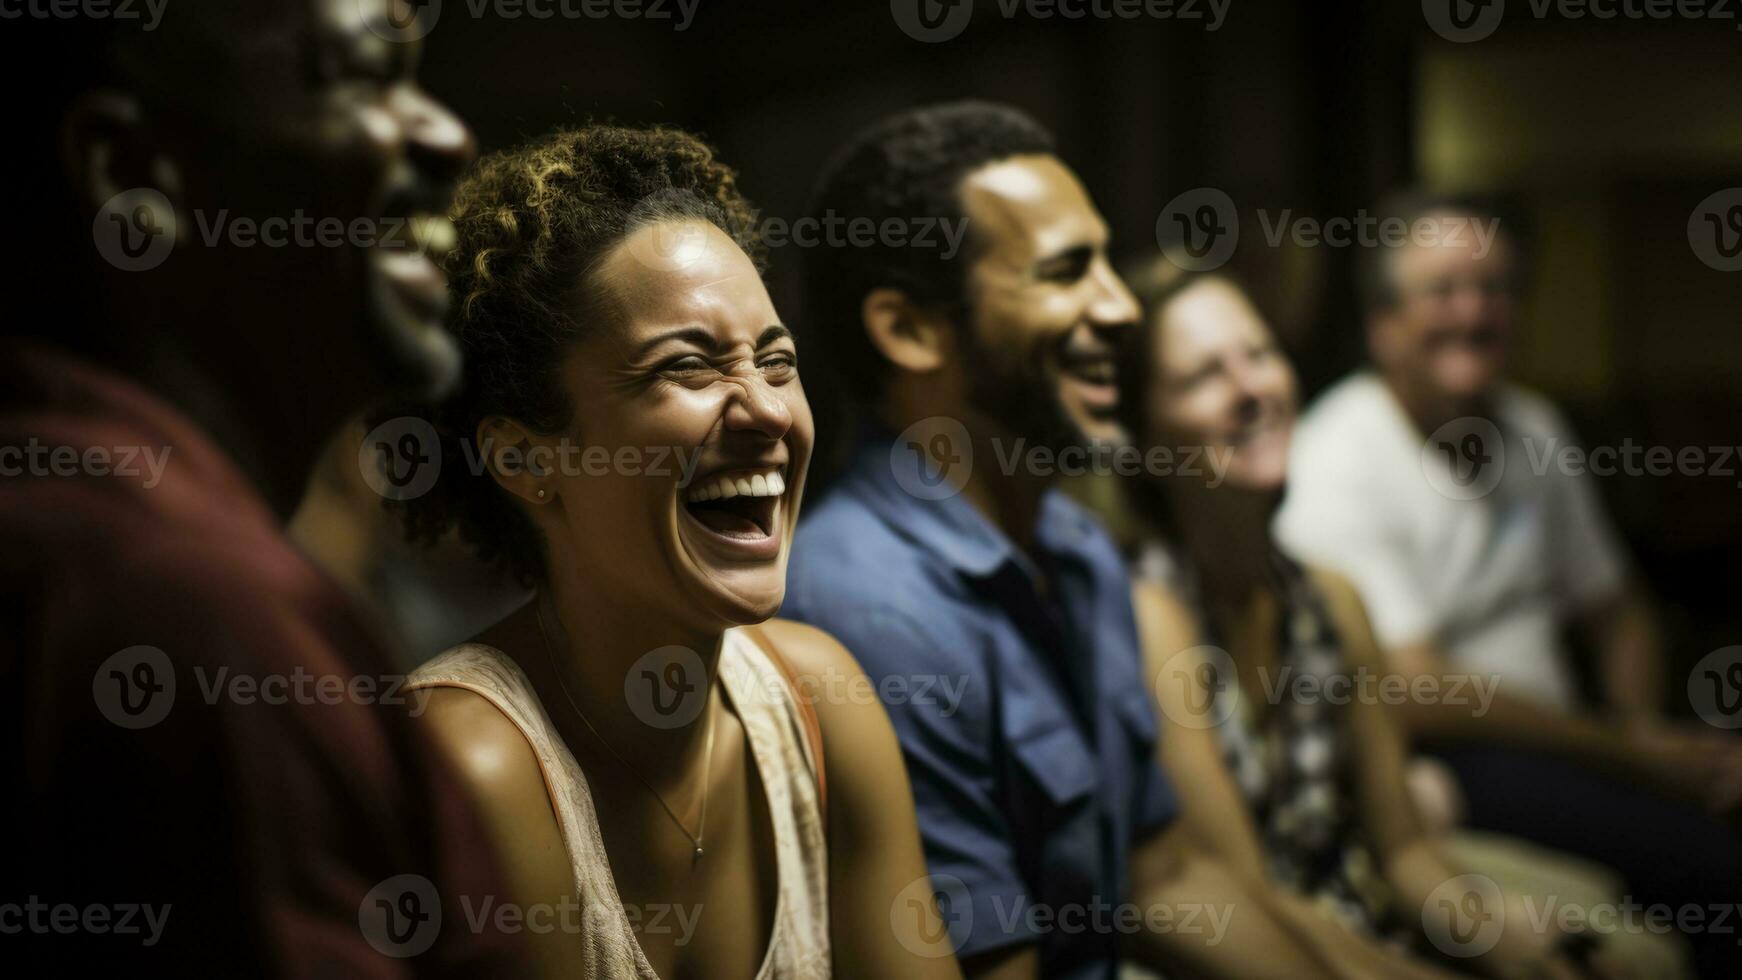 Participants enjoying laughter therapy experiencing emotional renewal through shared humor photo